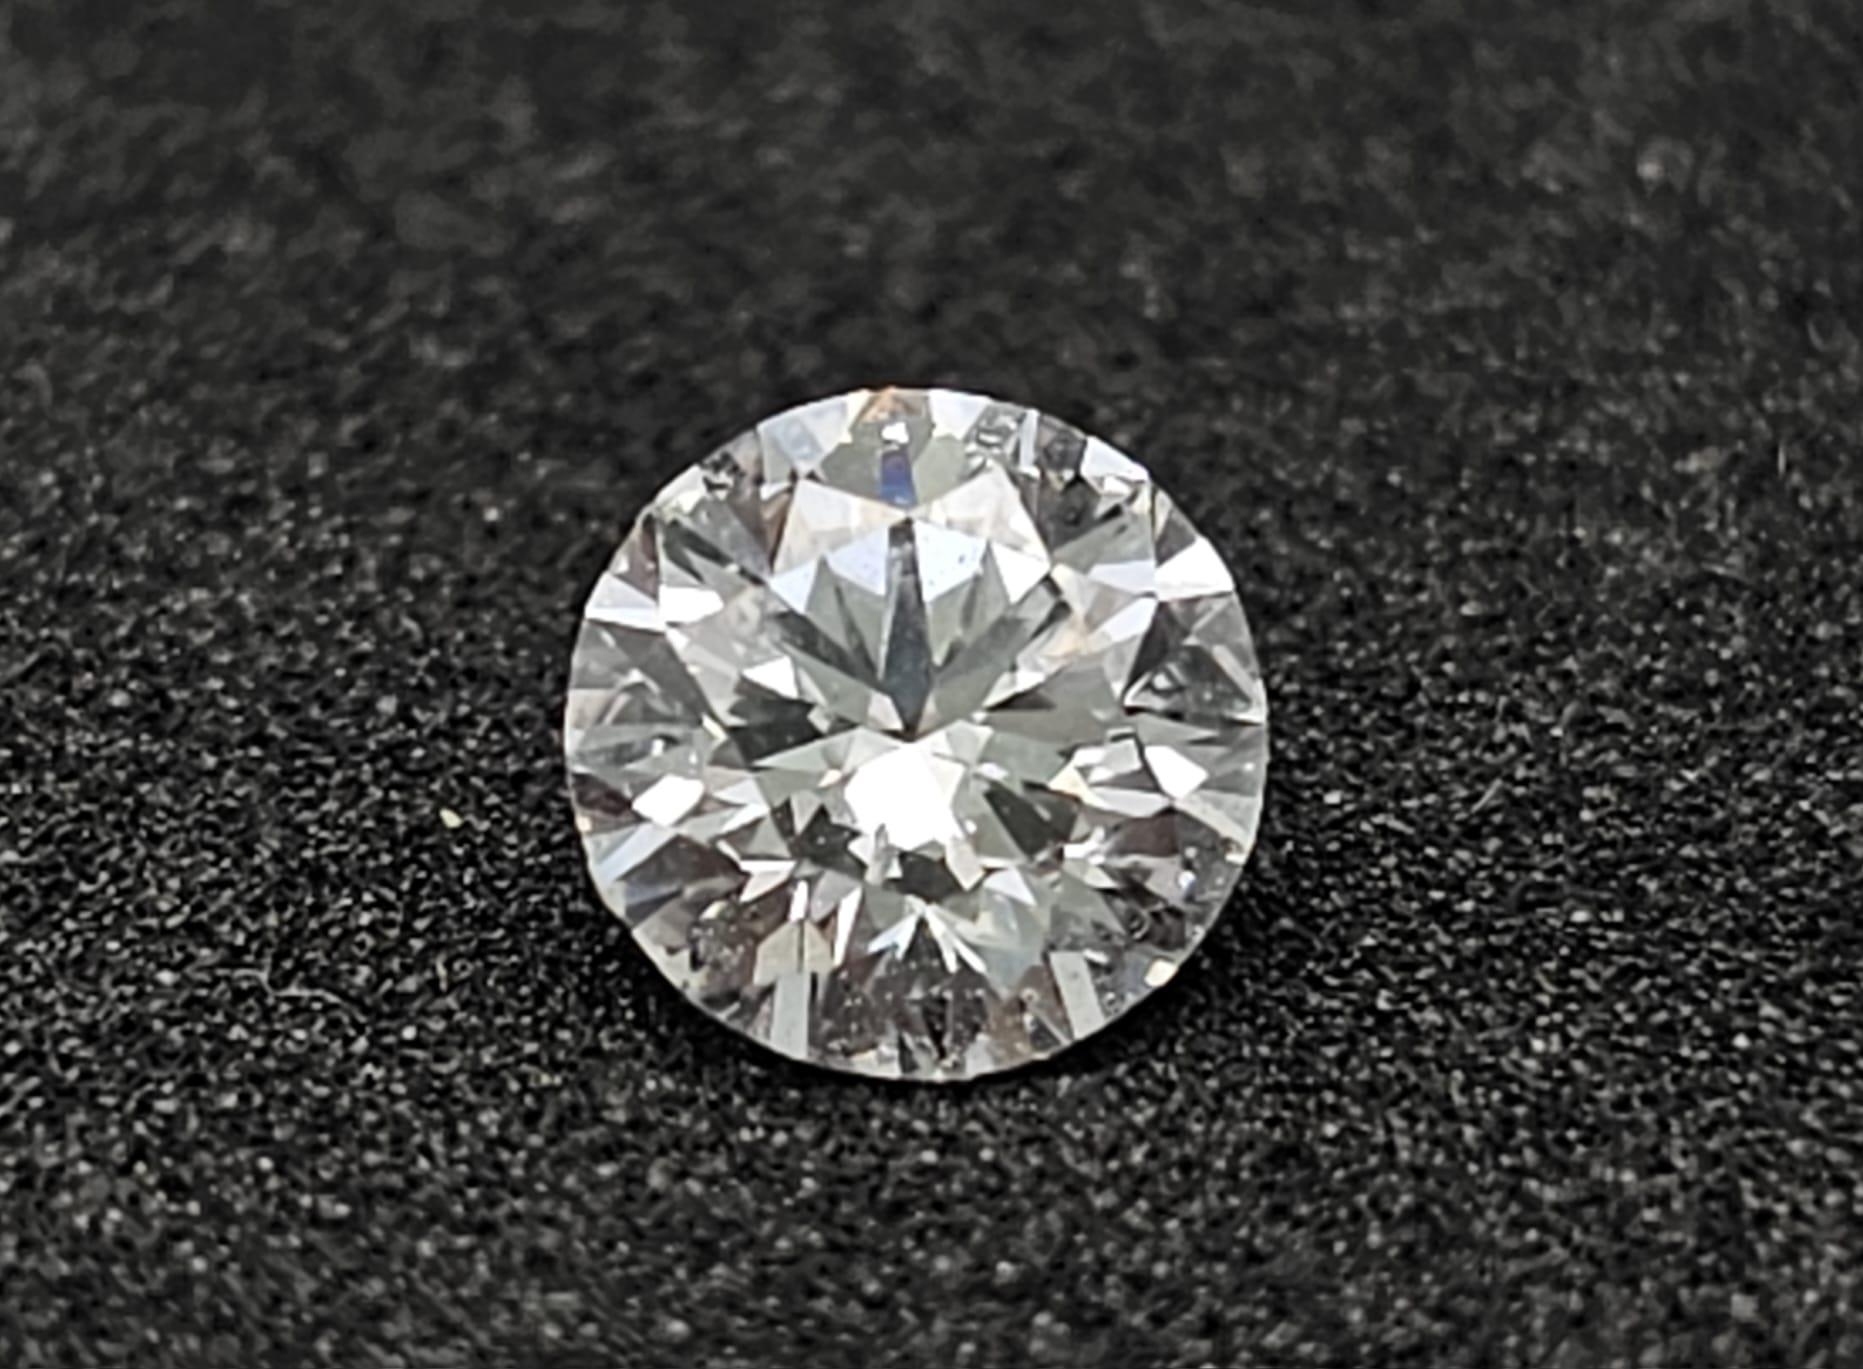 GIA CERTIFIED ROUND BRILIANT CUT DIAMOND. 0.70CT D FLAWLESS GIA CERT INCLUDED 2106881353